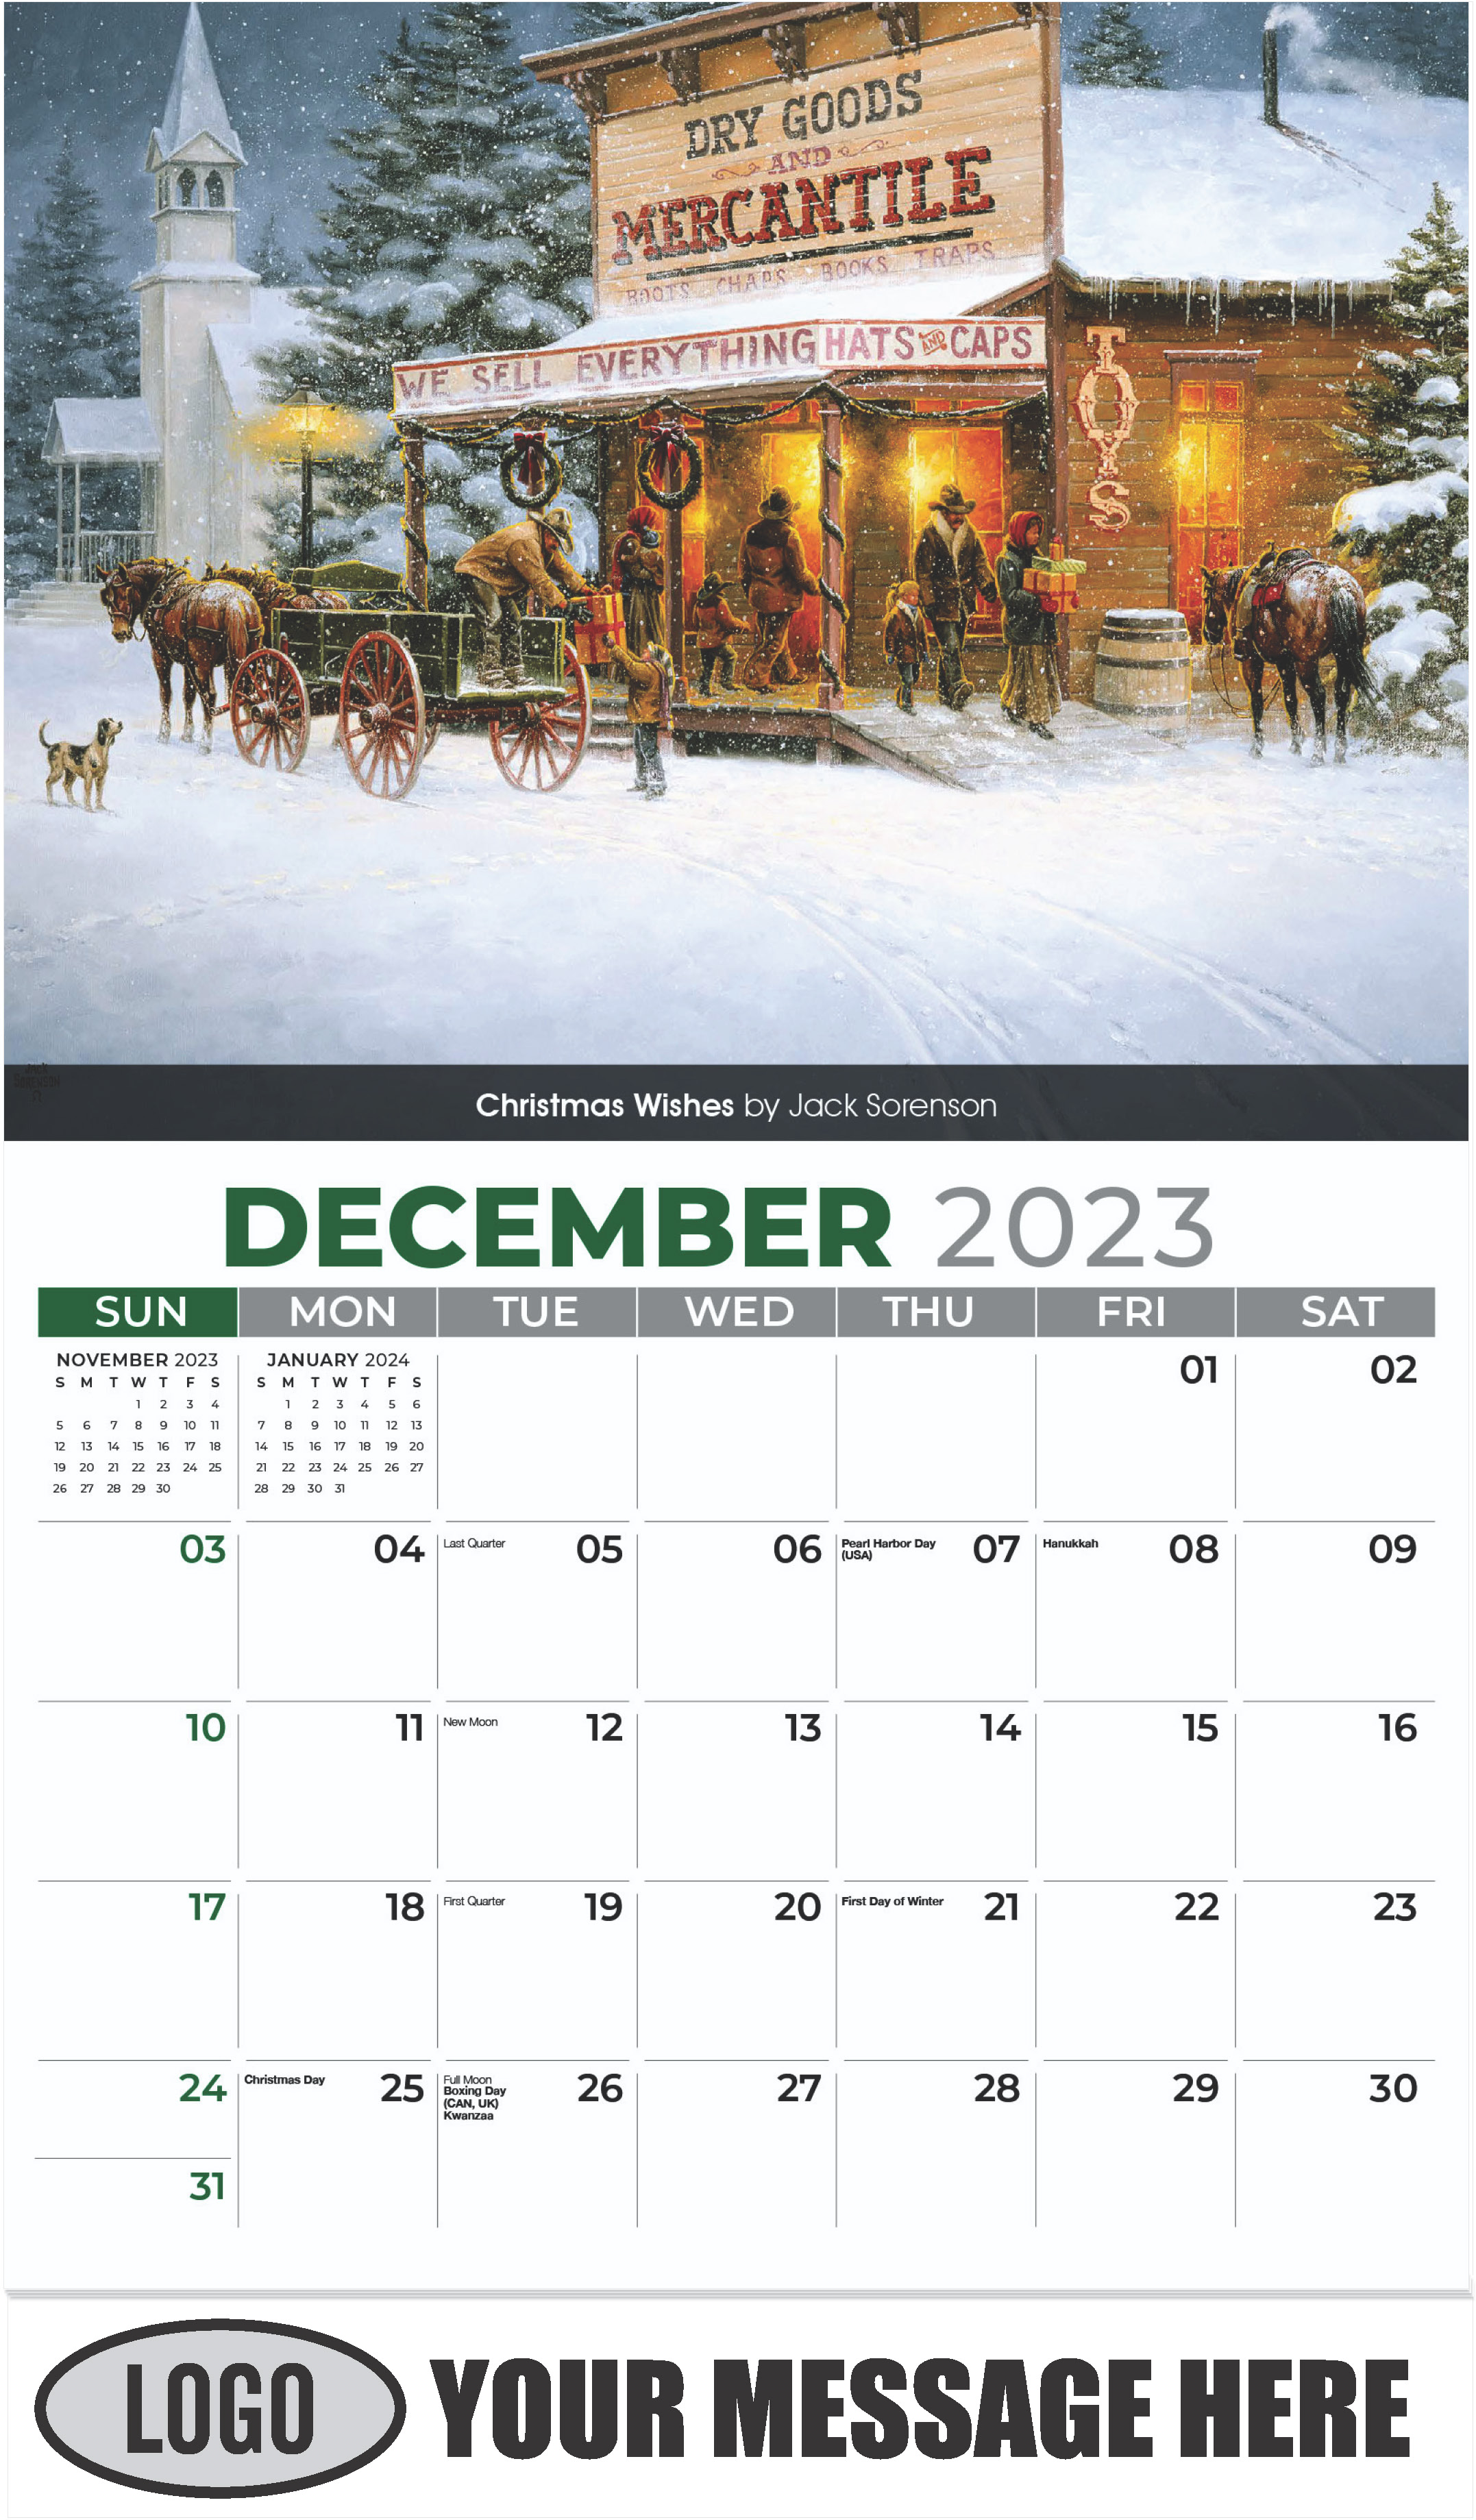 Christmas Wishes by Jack Sorenson - December 2023 - Spirit of the West 2023 Promotional Calendar